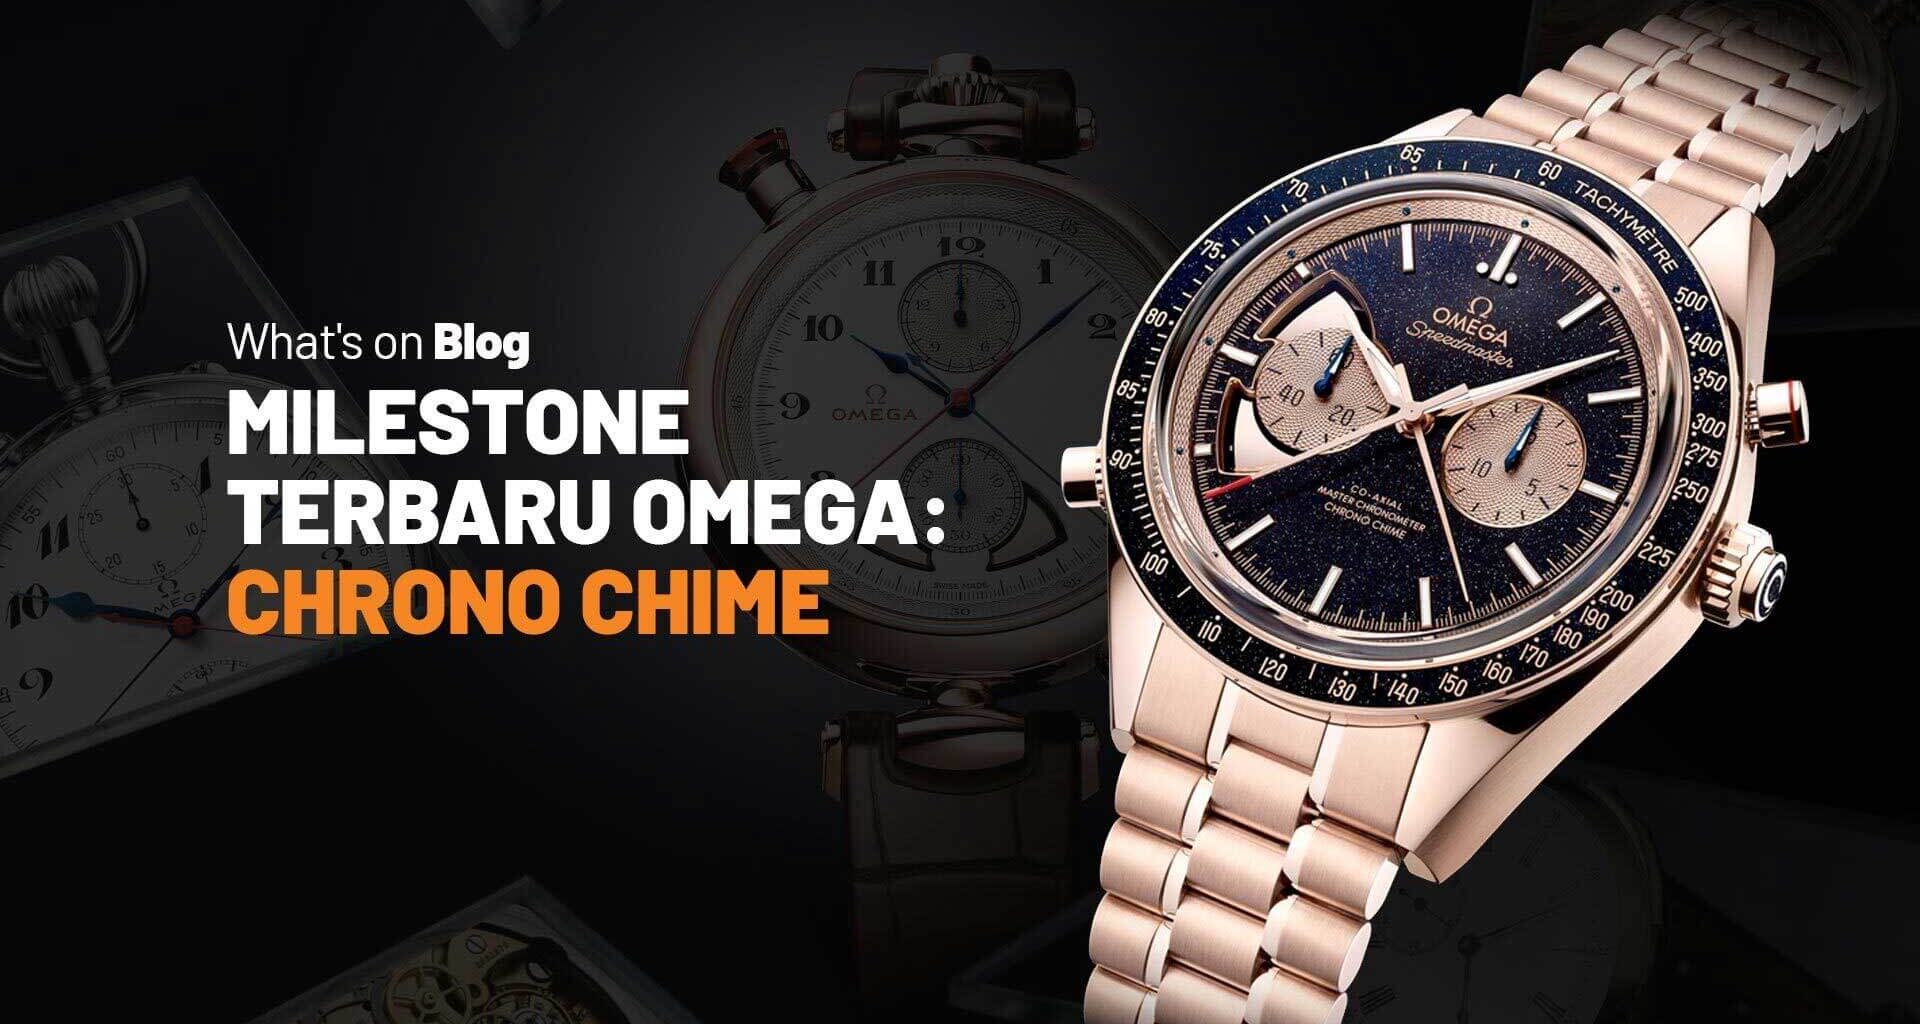 Introducing - Omega Chrono Chime Olympic 1932 and Speedmaster